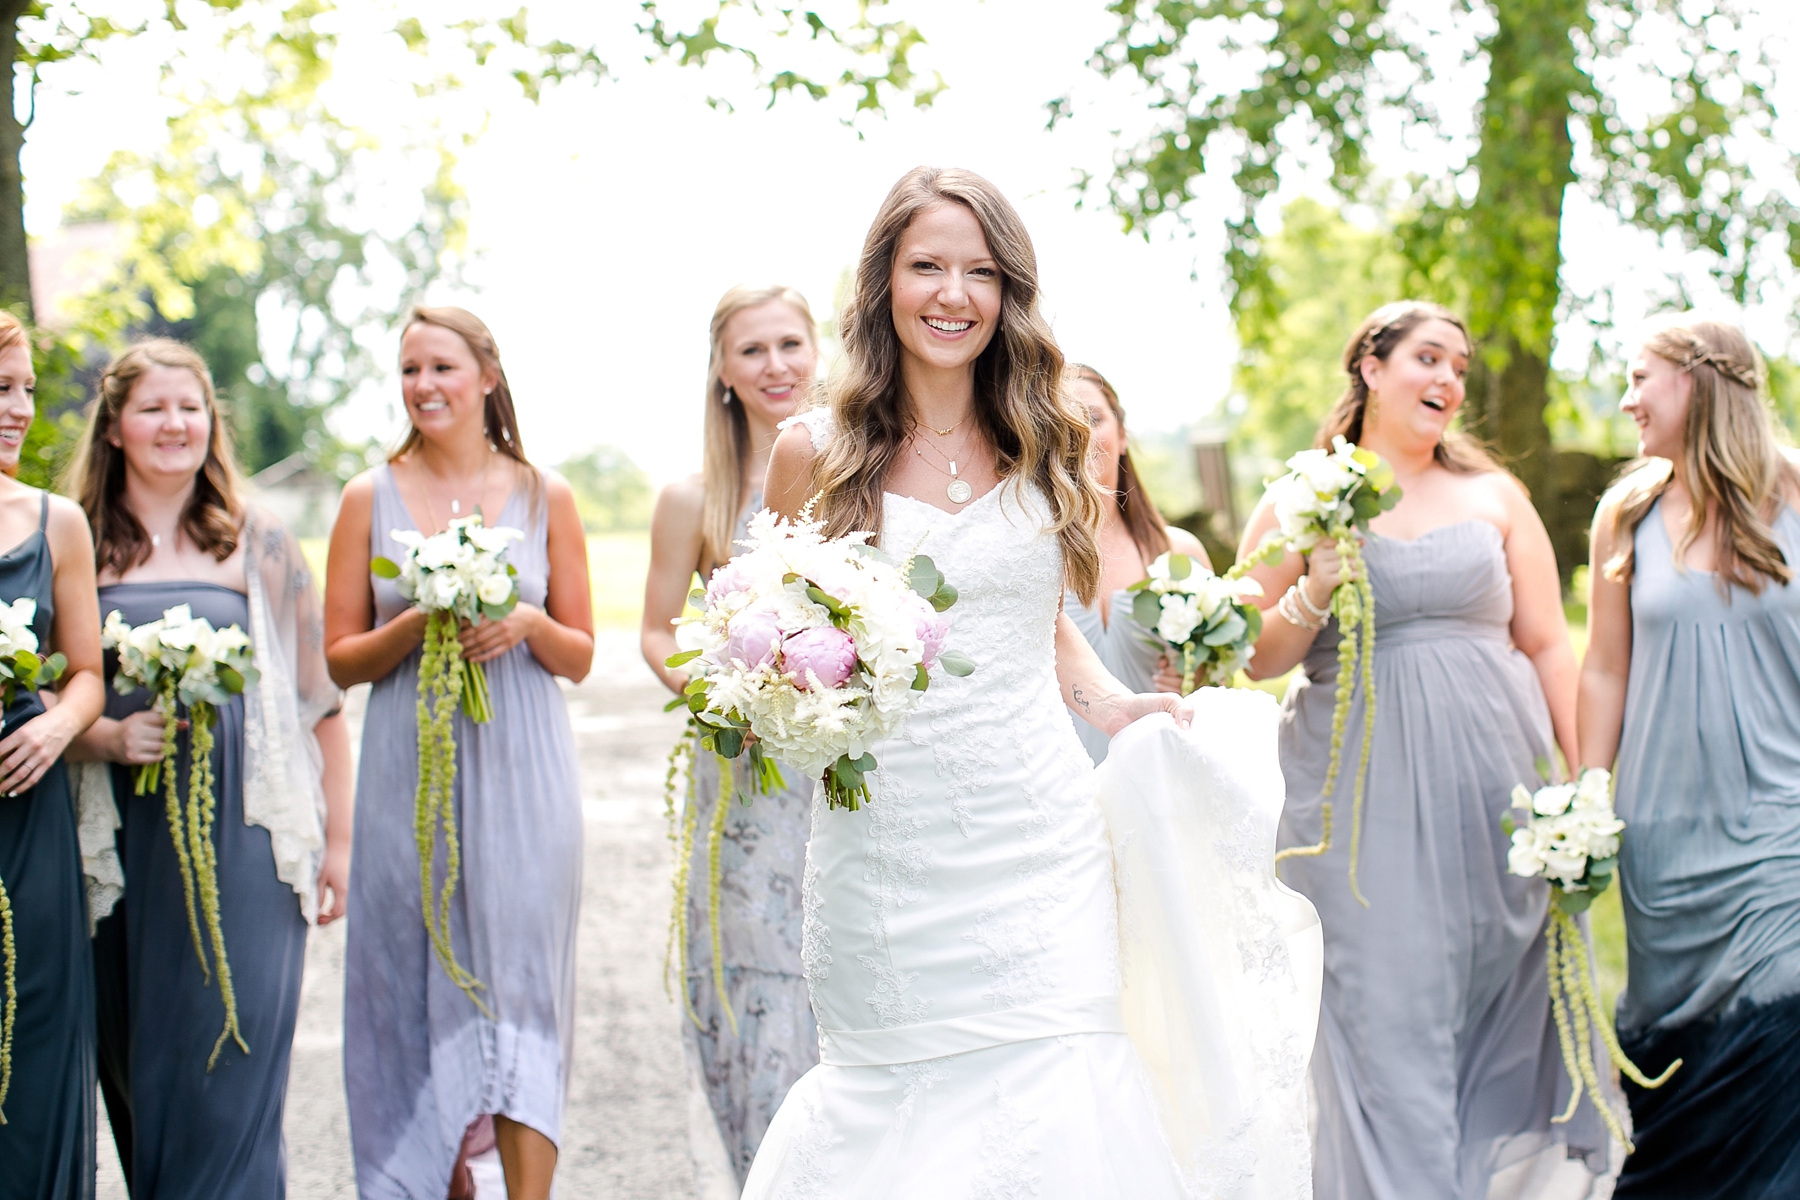 Bride and bridesmaids by Elle Danielle Photography